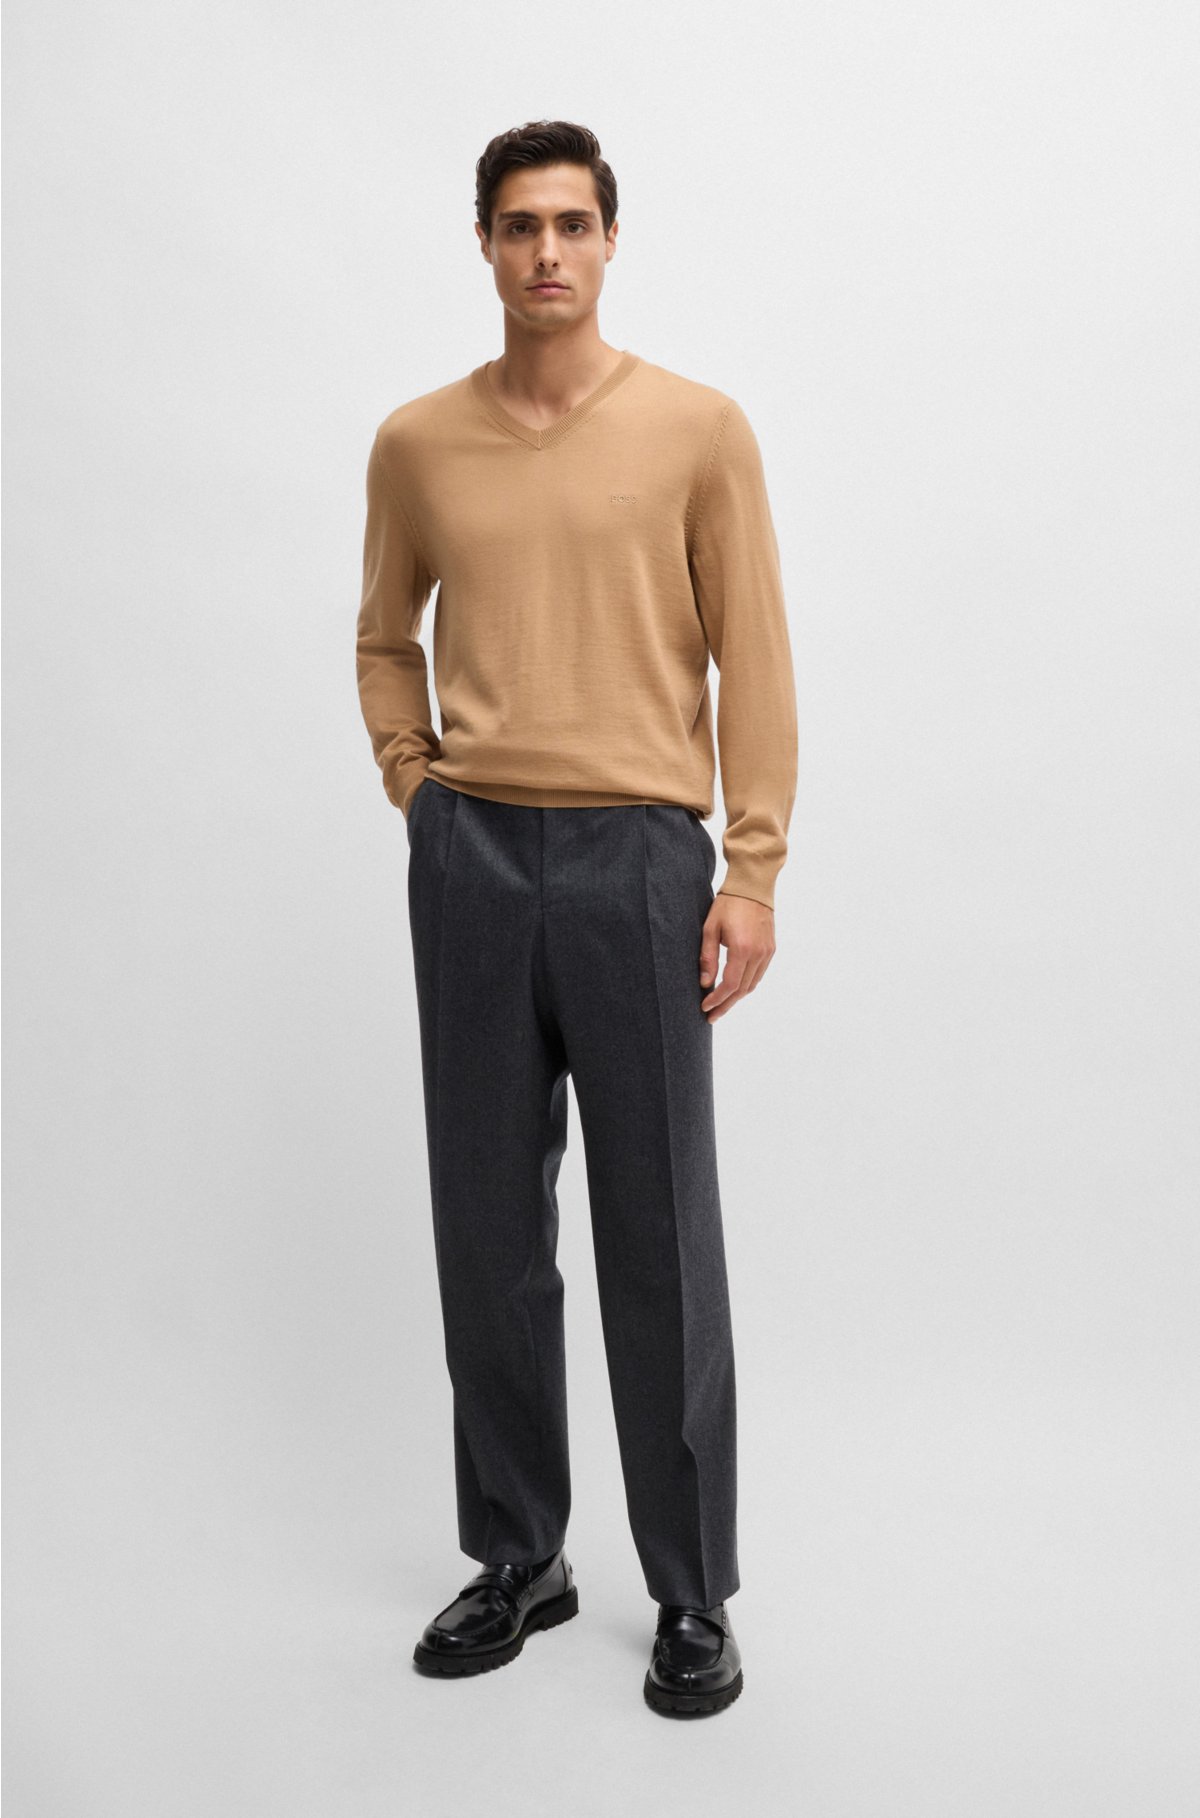 BOSS - V-neck sweater in responsible wool